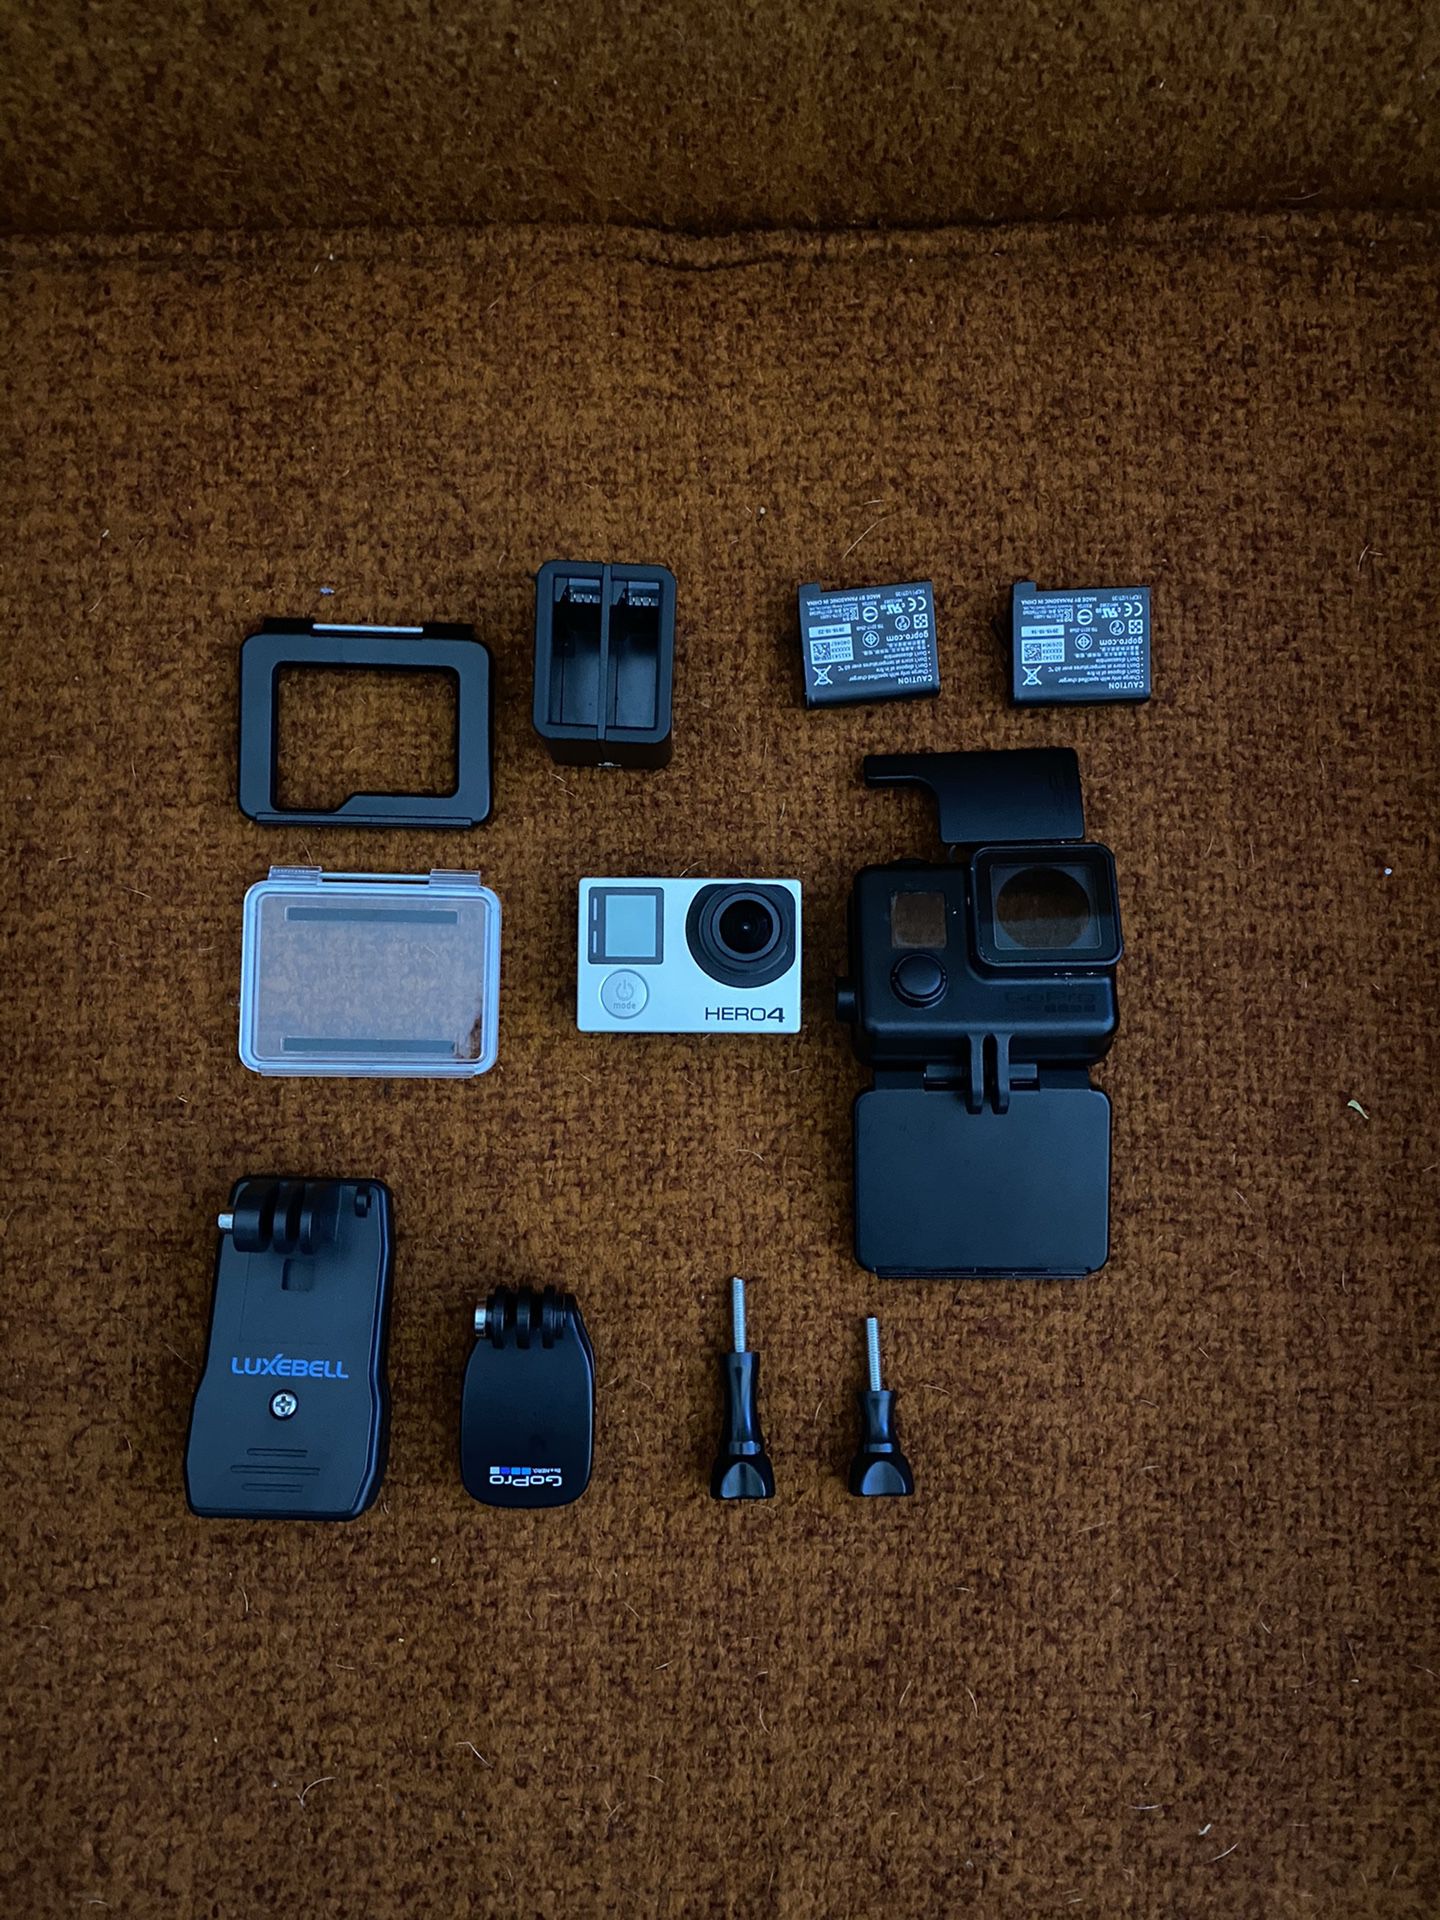 GoPro Hero4 with Accessories